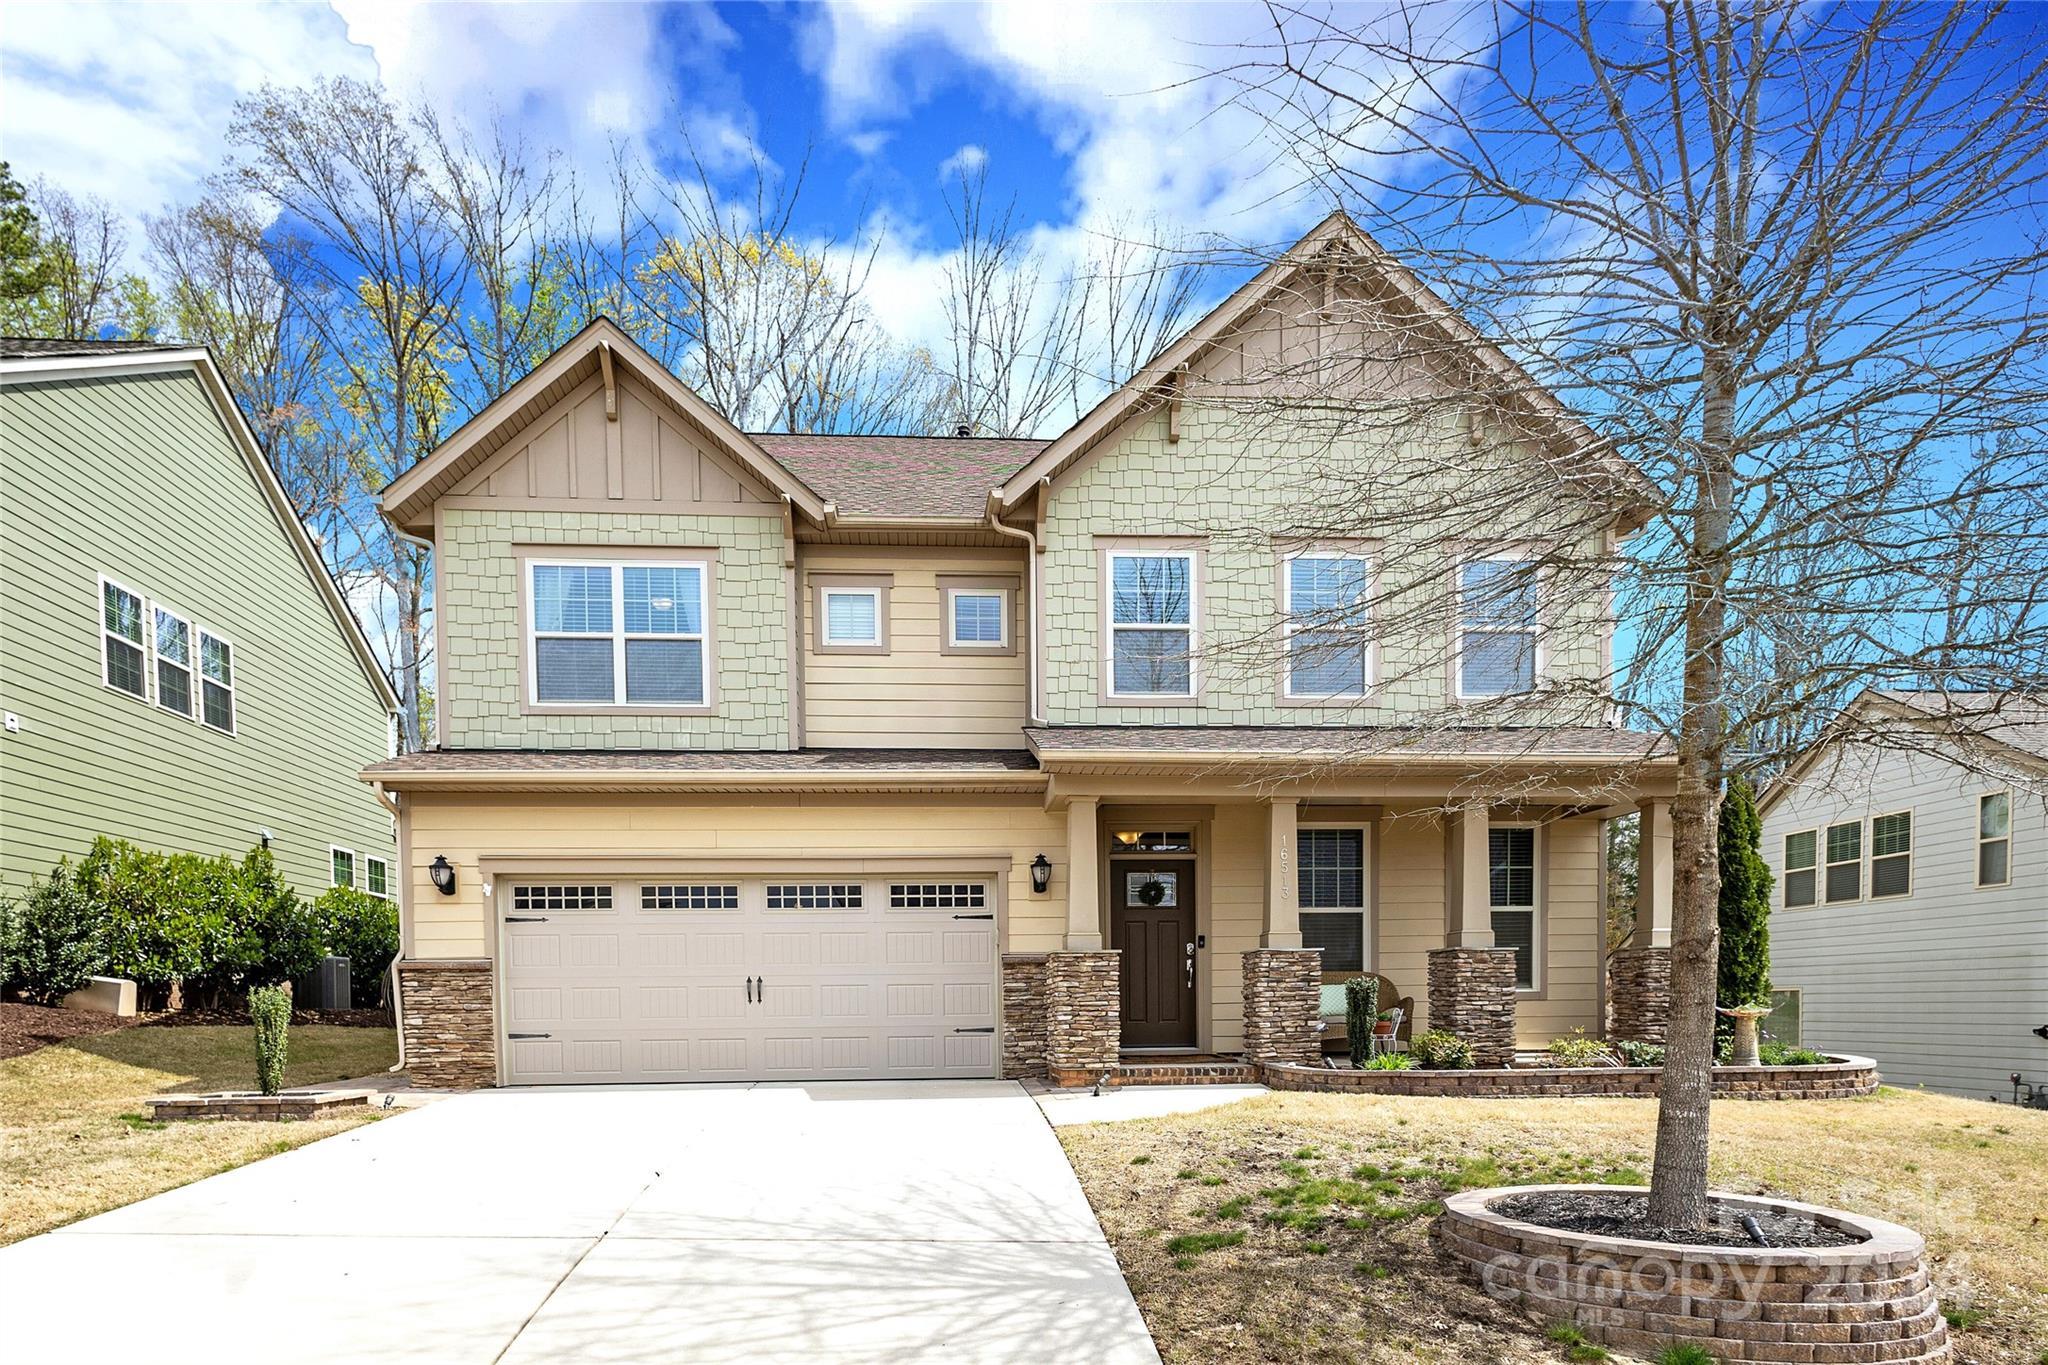 Photo one of 16513 Palisades Commons Dr Charlotte NC 28278 | MLS 4123272